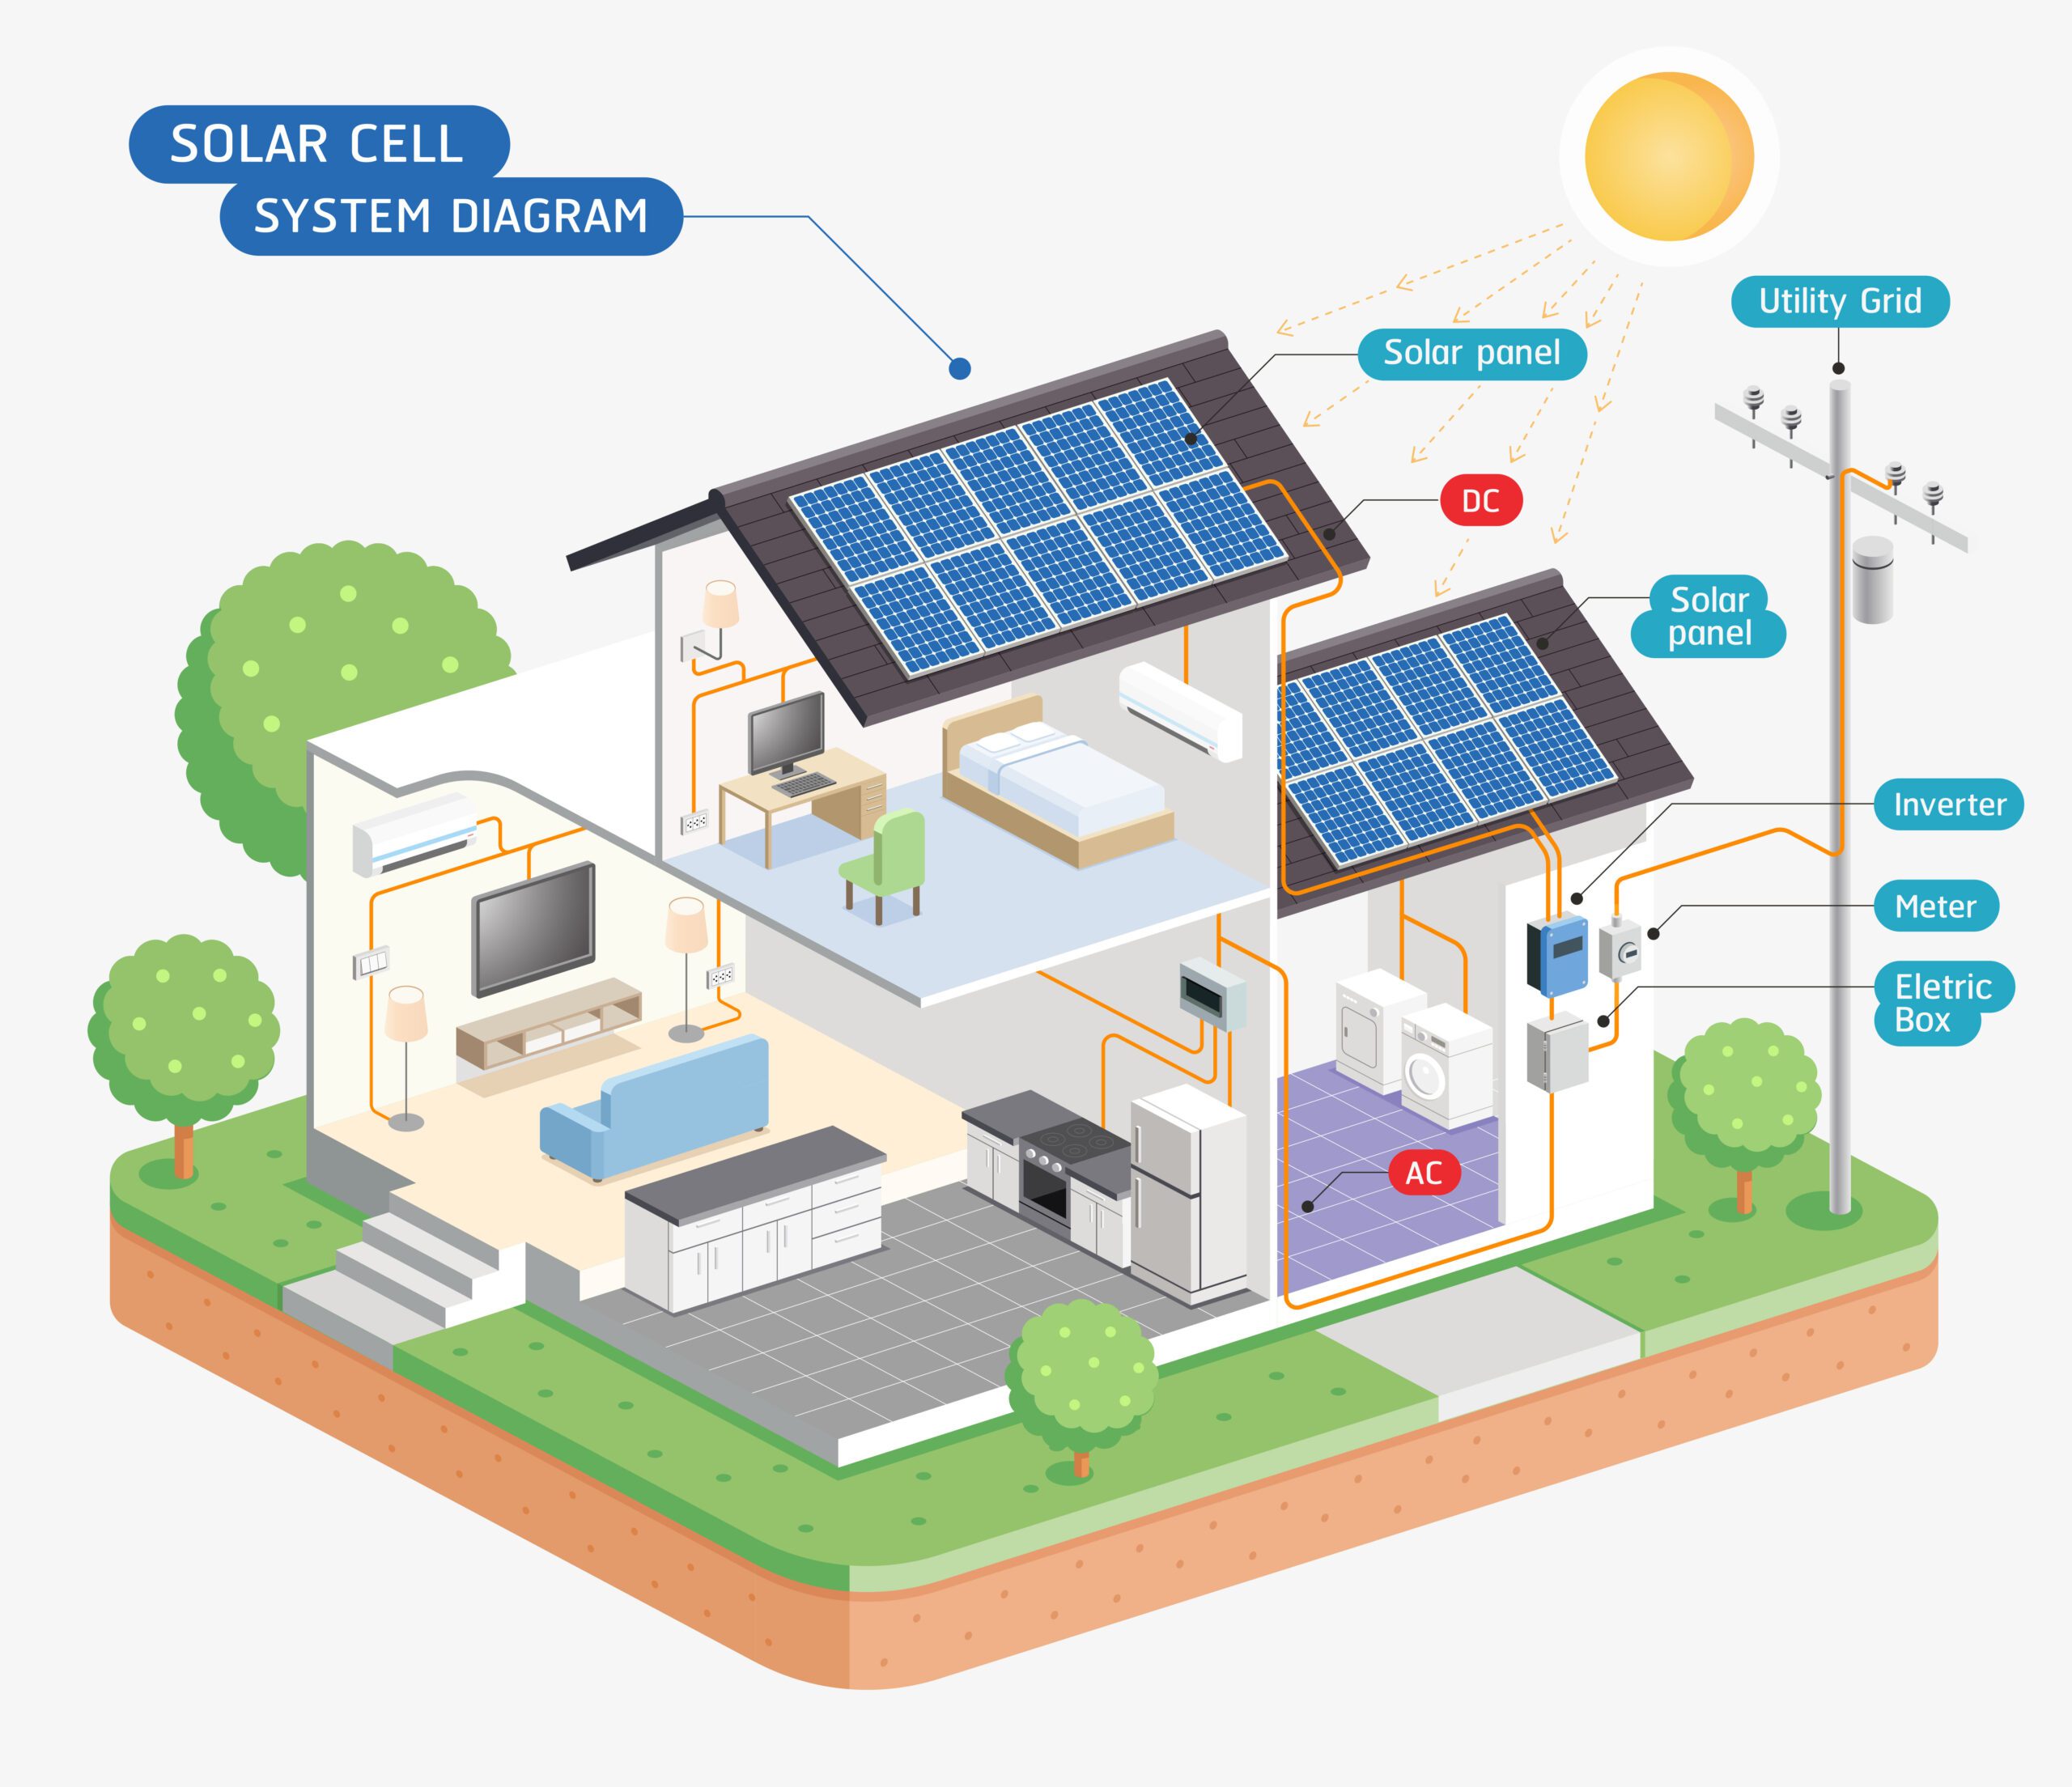 A diagram showing how solar panels can support a residential home.